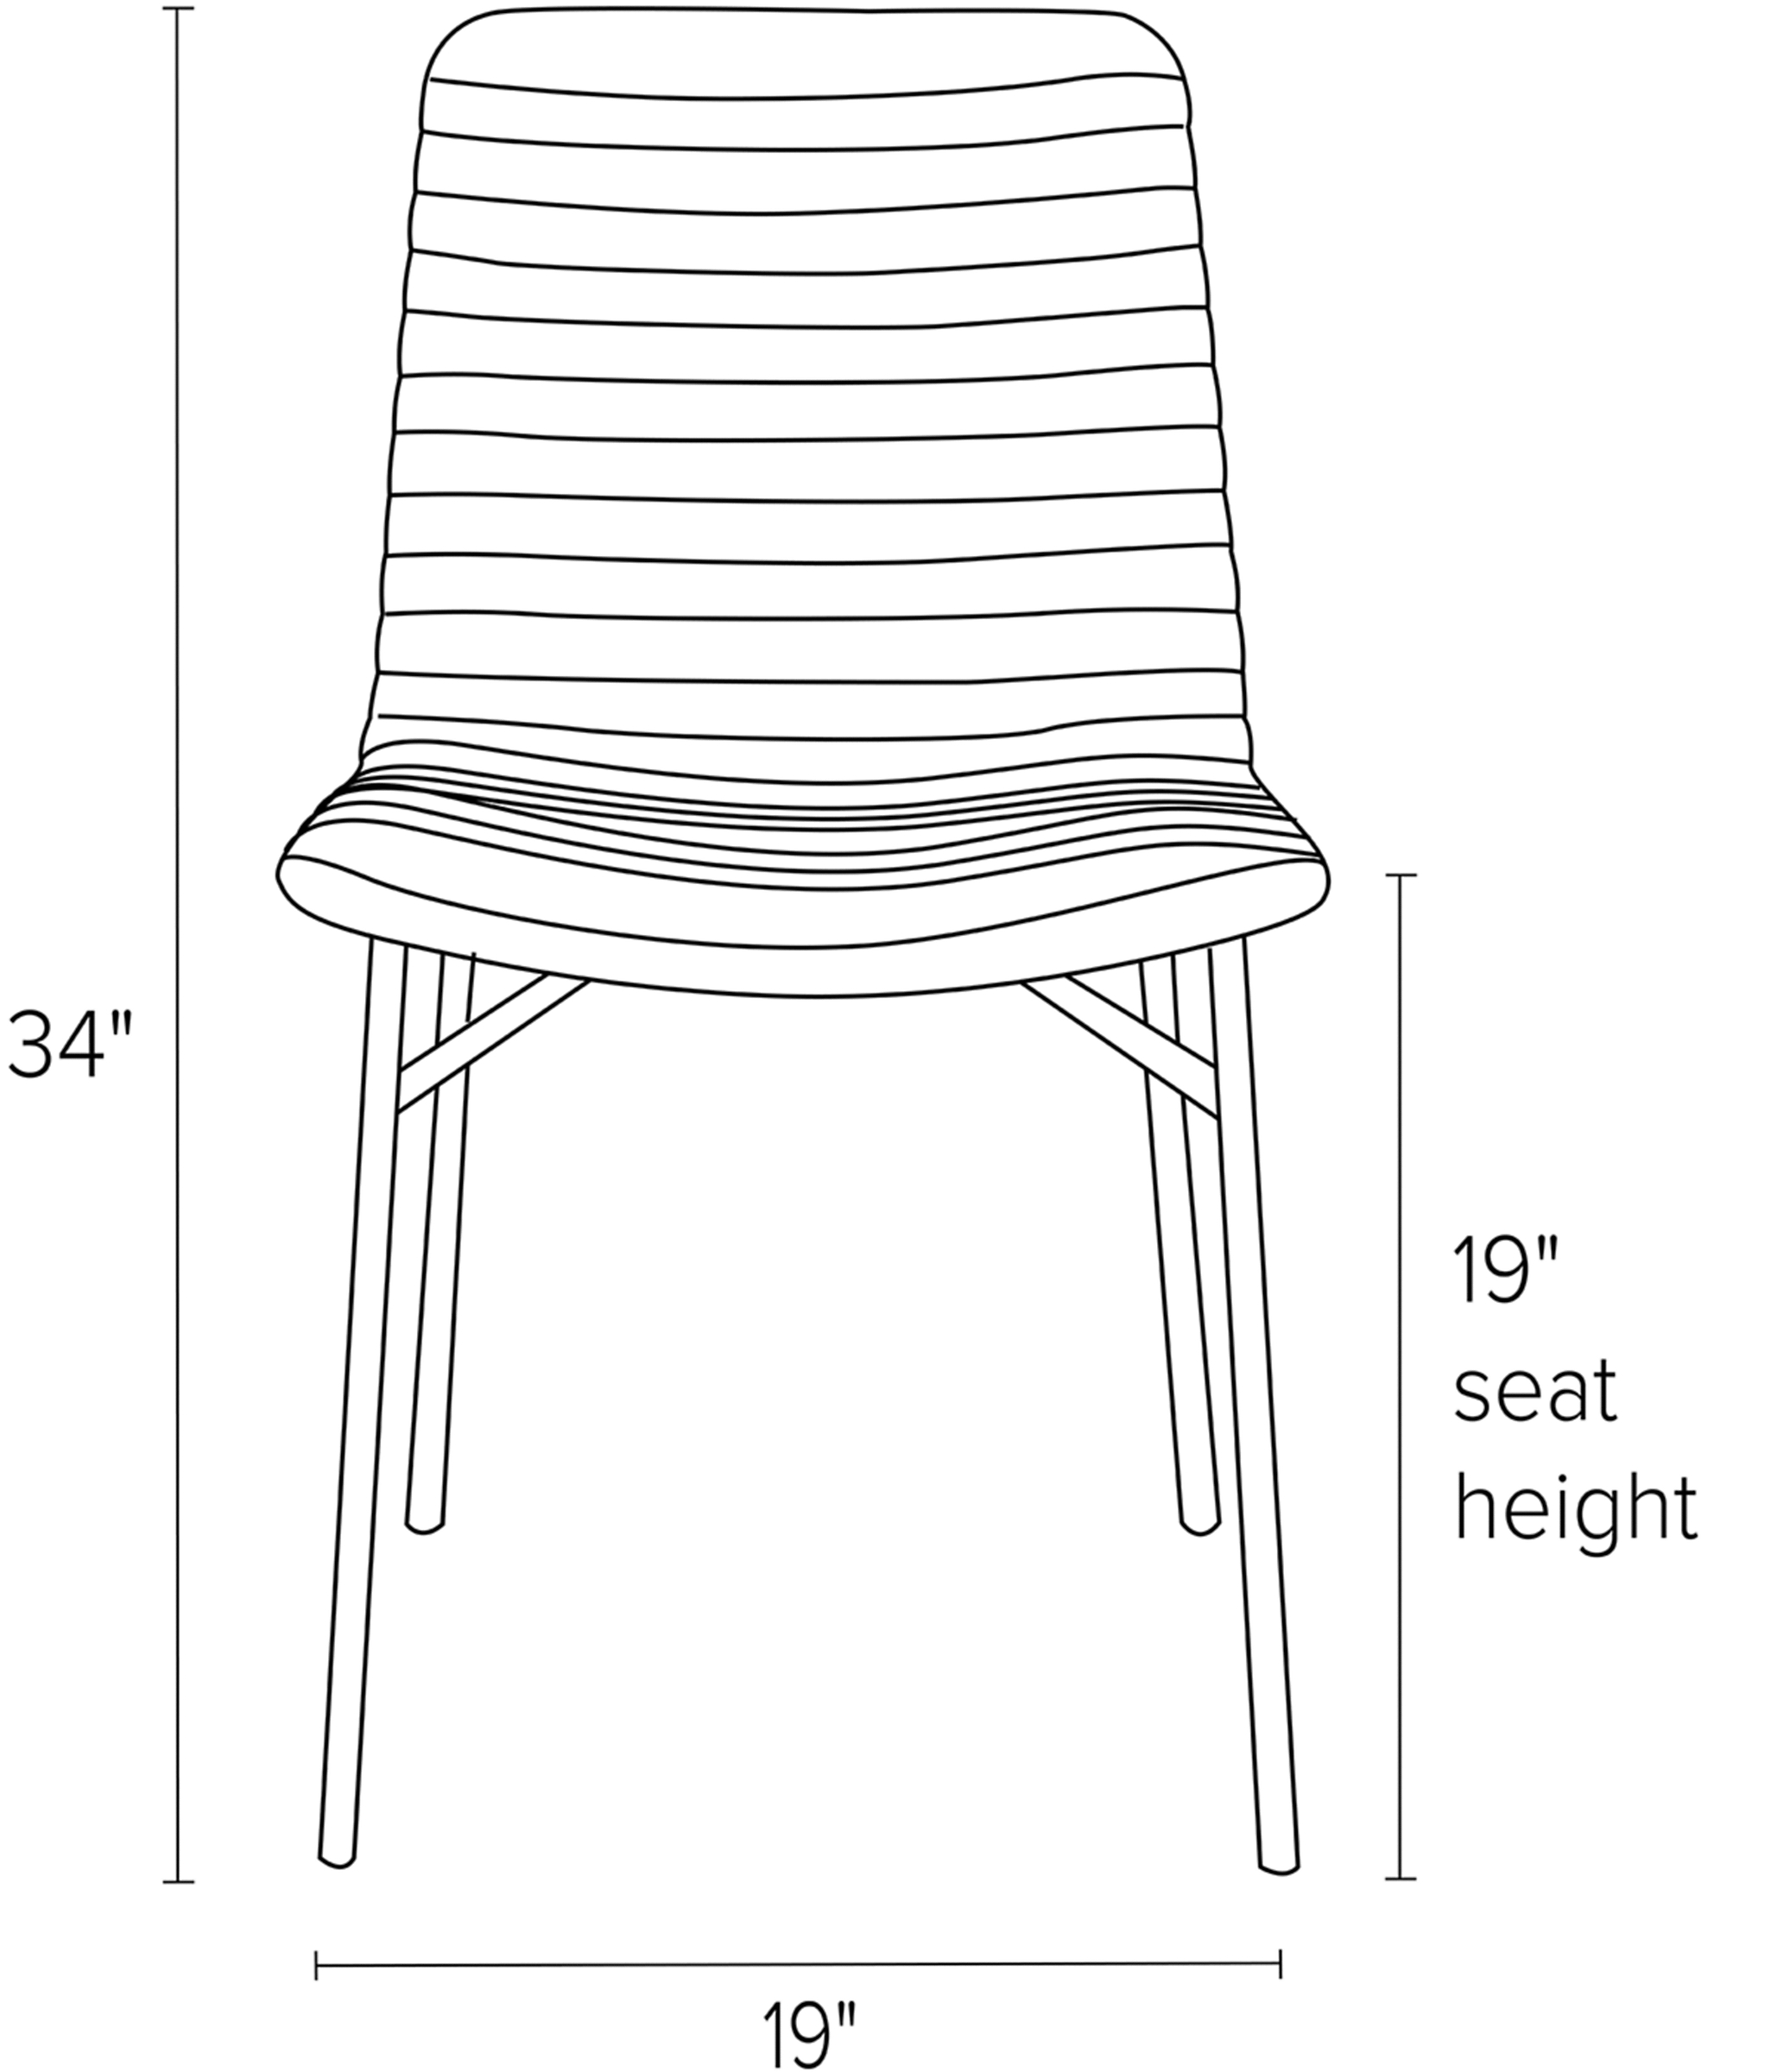 Front view dimension illustration of Cato side chair.